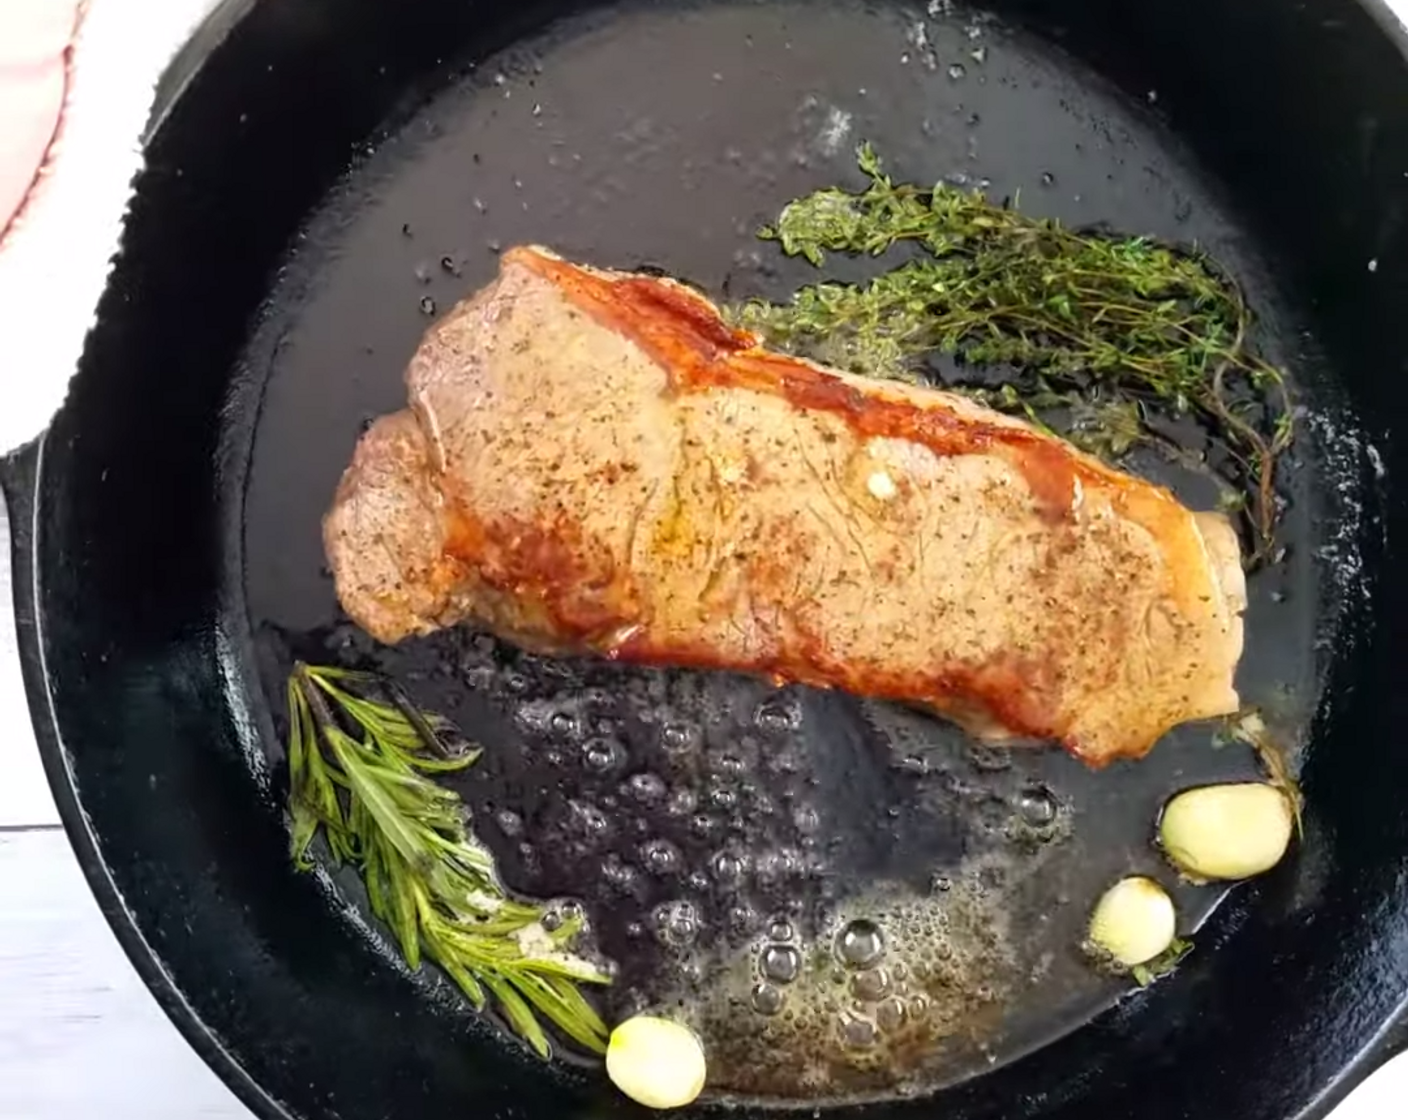 step 5 Add fresh herbs Fresh Thyme (1 sprig), Fresh Rosemary (1 sprig), and Garlic (1 clove) to the pan along with more Extra-Virgin Olive Oil (1 Tbsp) and Butter (1 Tbsp). While the steak is grilling, baste the steak with the herb-seasoned butter.